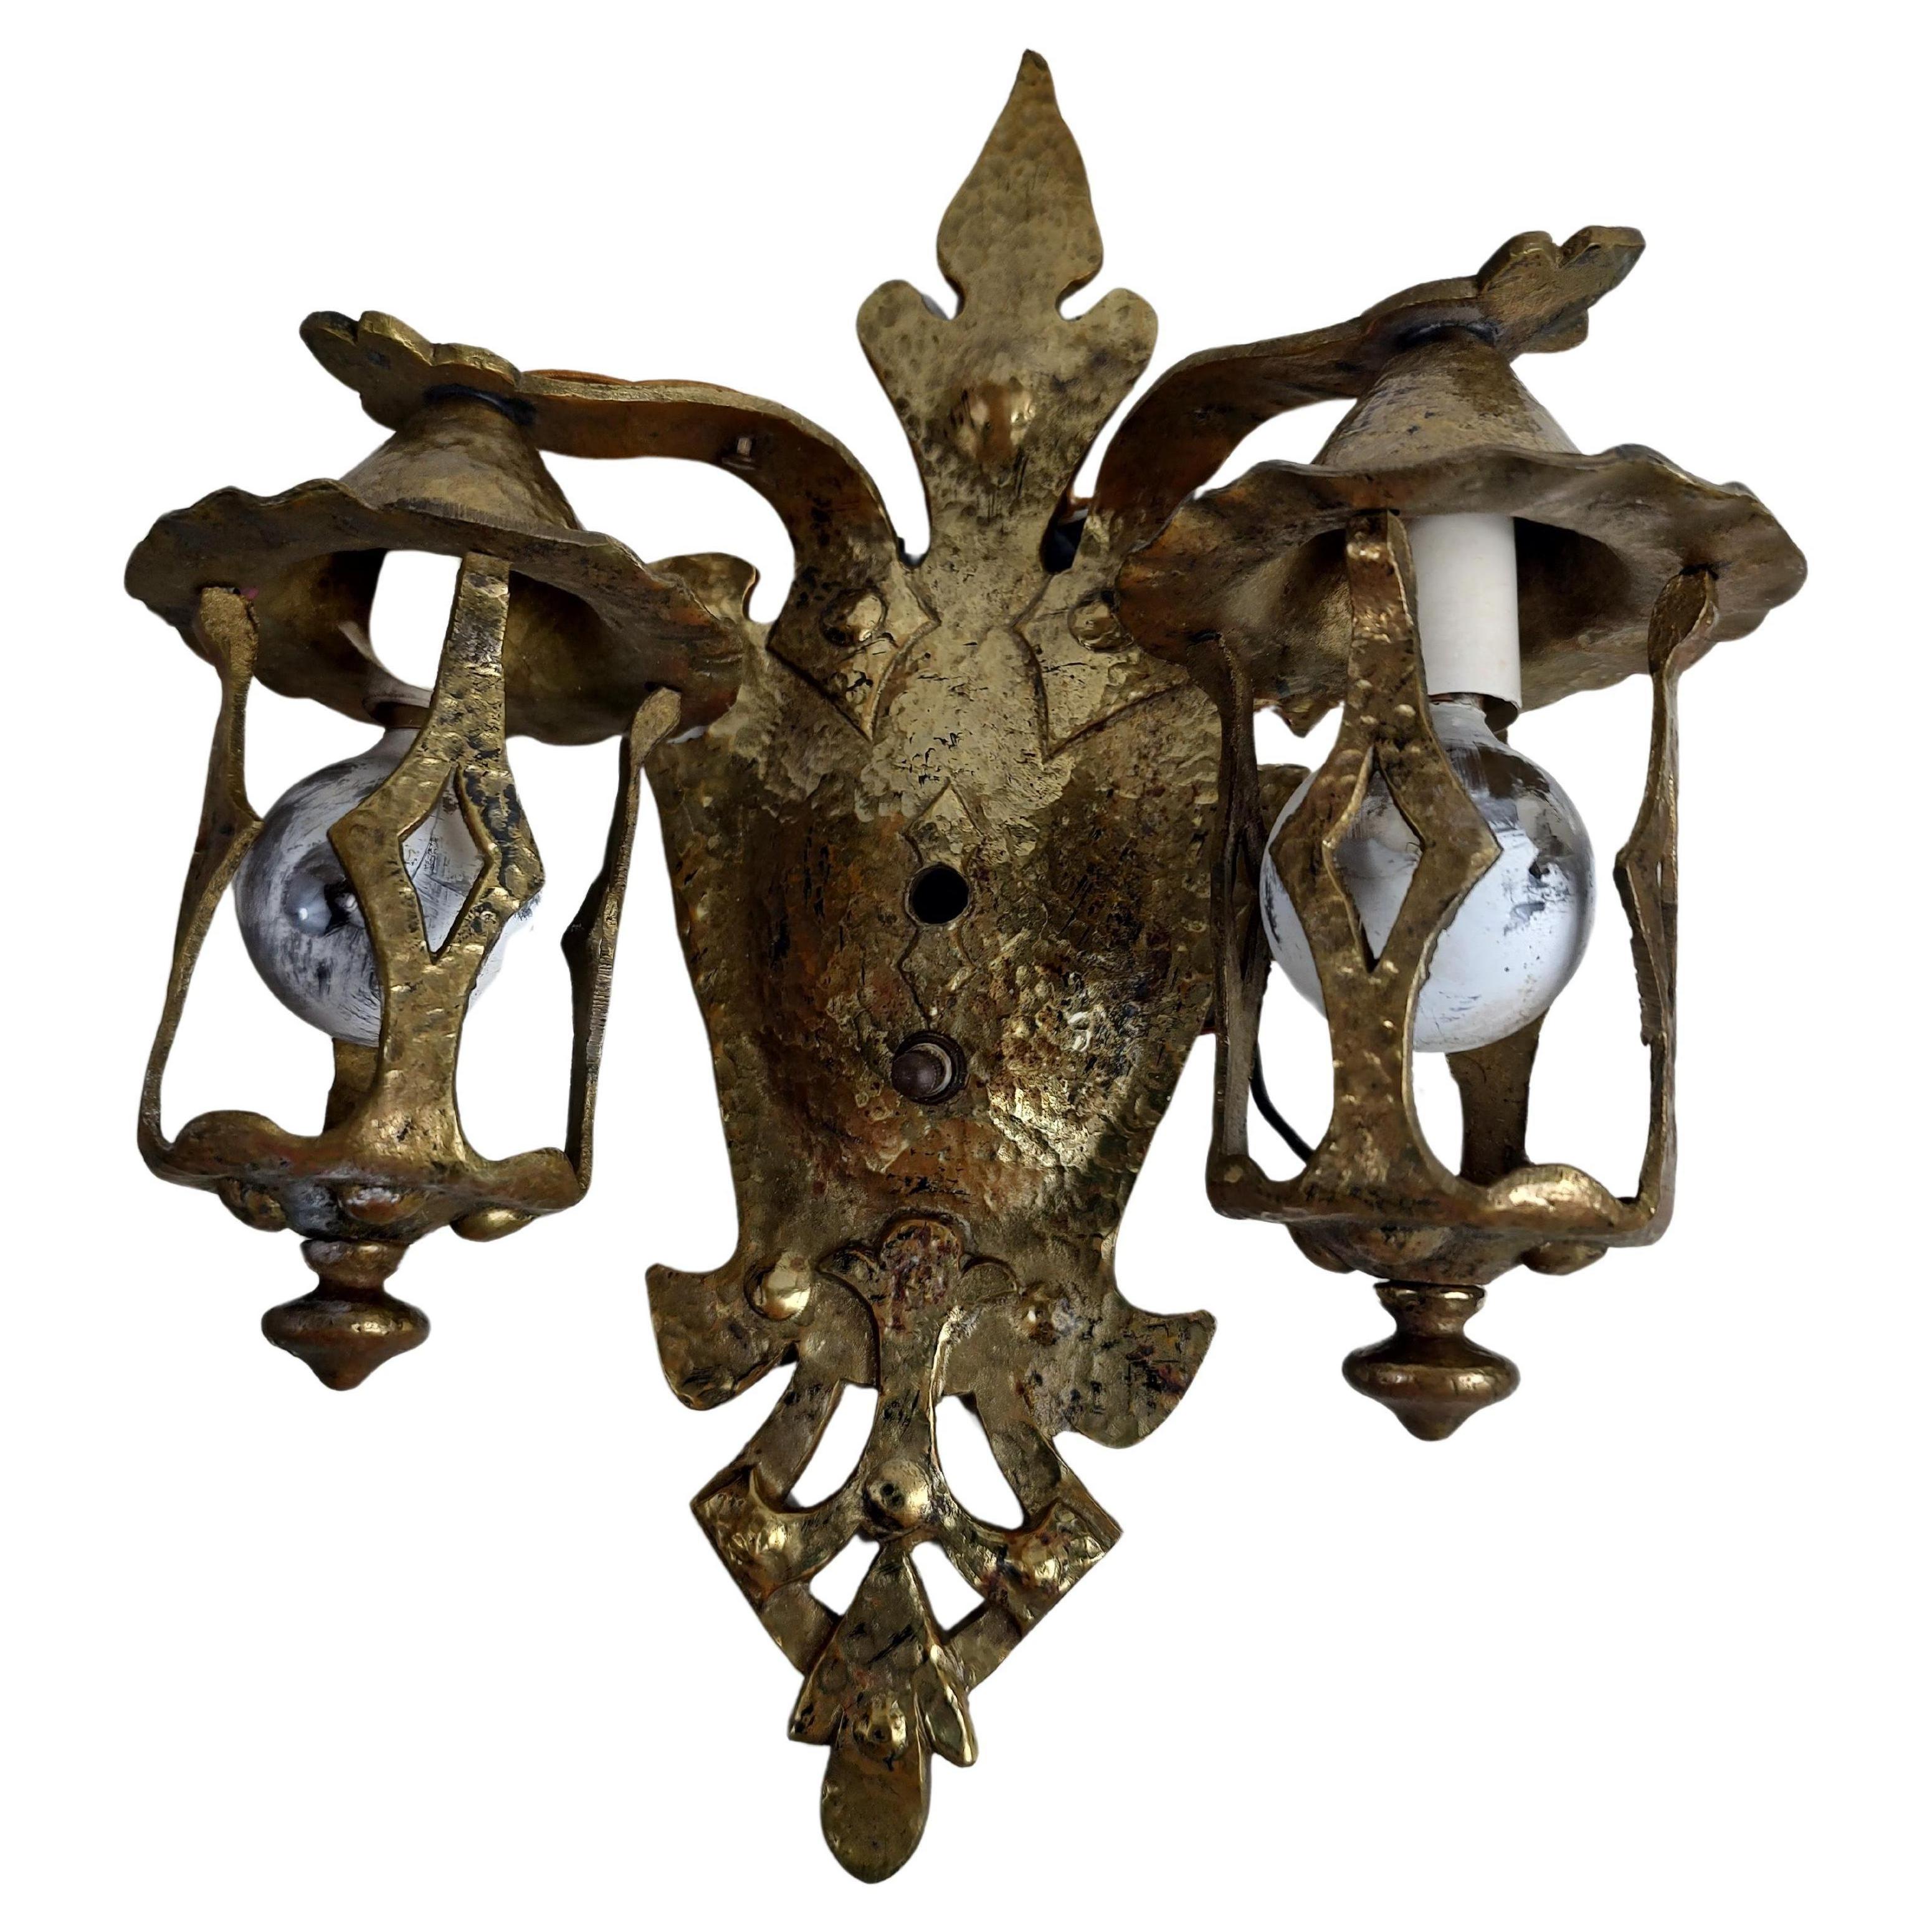 Early 20th Century Brass Arts & Crafts Hand-Hammered Wall Sconces  In Good Condition For Sale In Port Jervis, NY